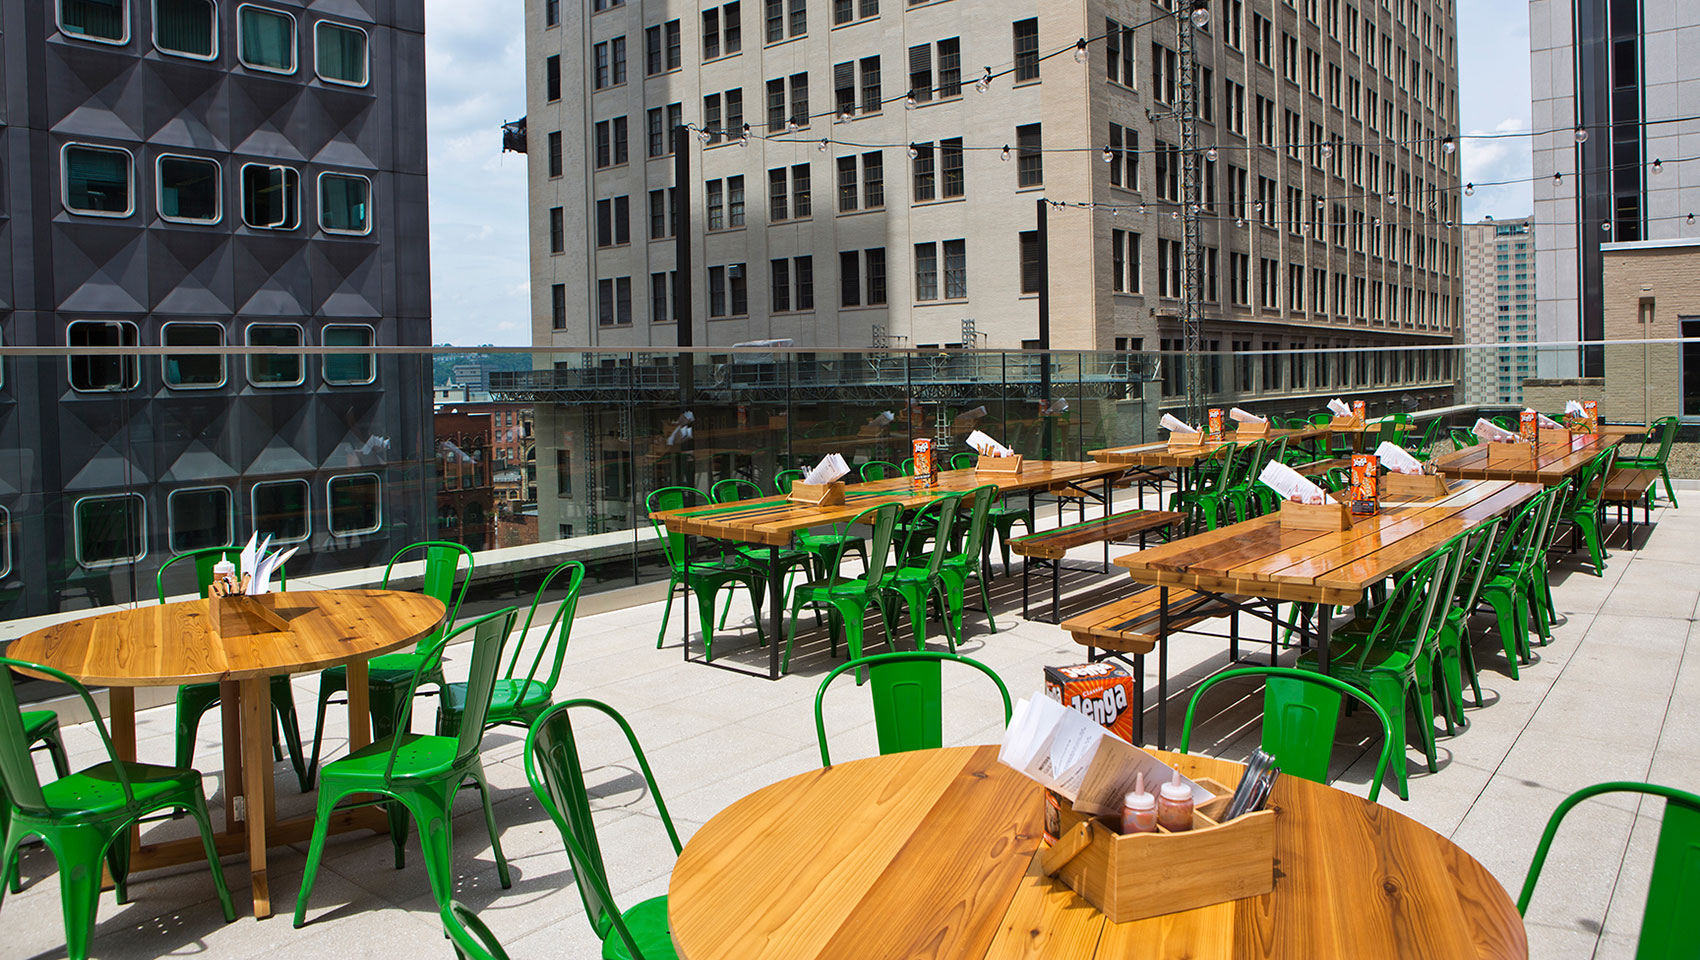 Biergarten’s rooftop patio with picnic tables and chairs